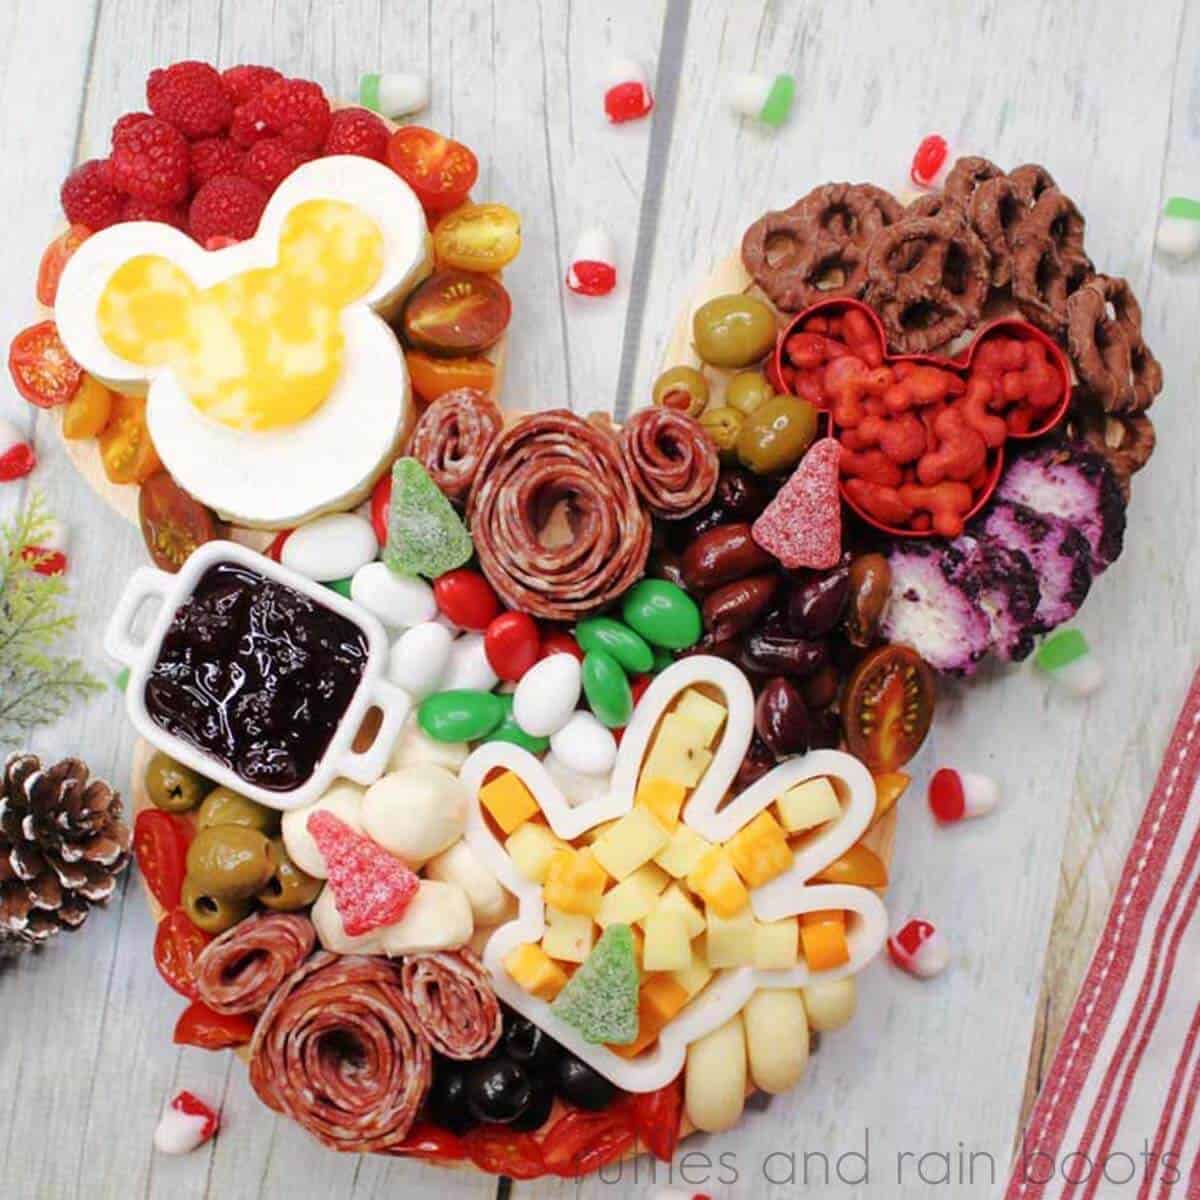 A colorful charcuterie board with a variety of sweets, fruits, and cured meats arranged in a whimsical, disney-inspired theme.